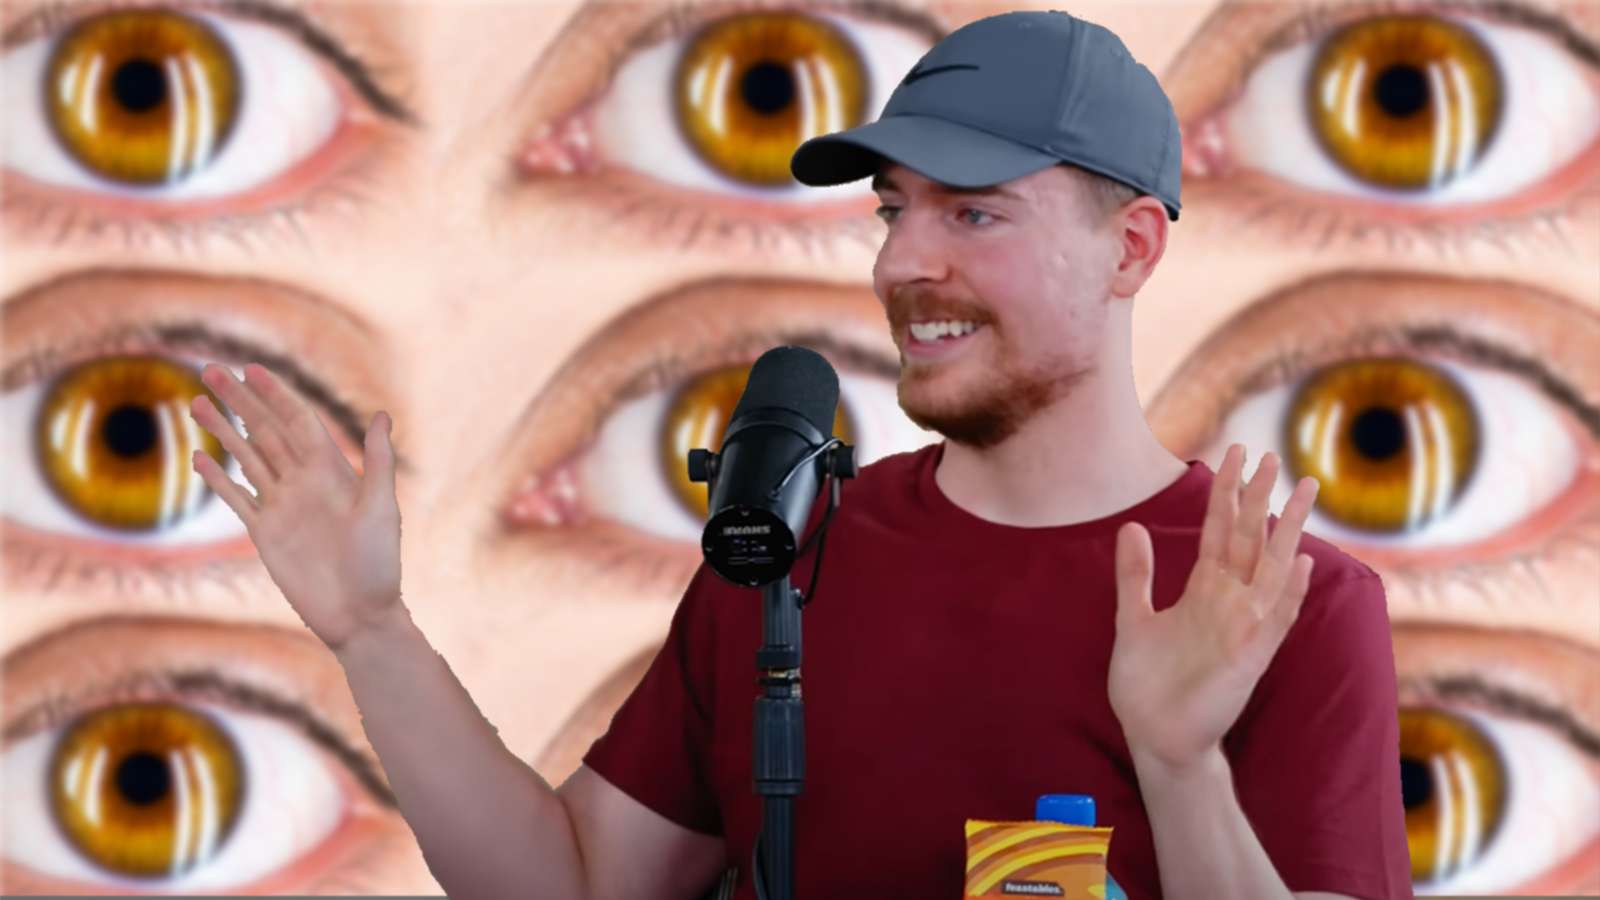 MrBeast discusses living in the public eye